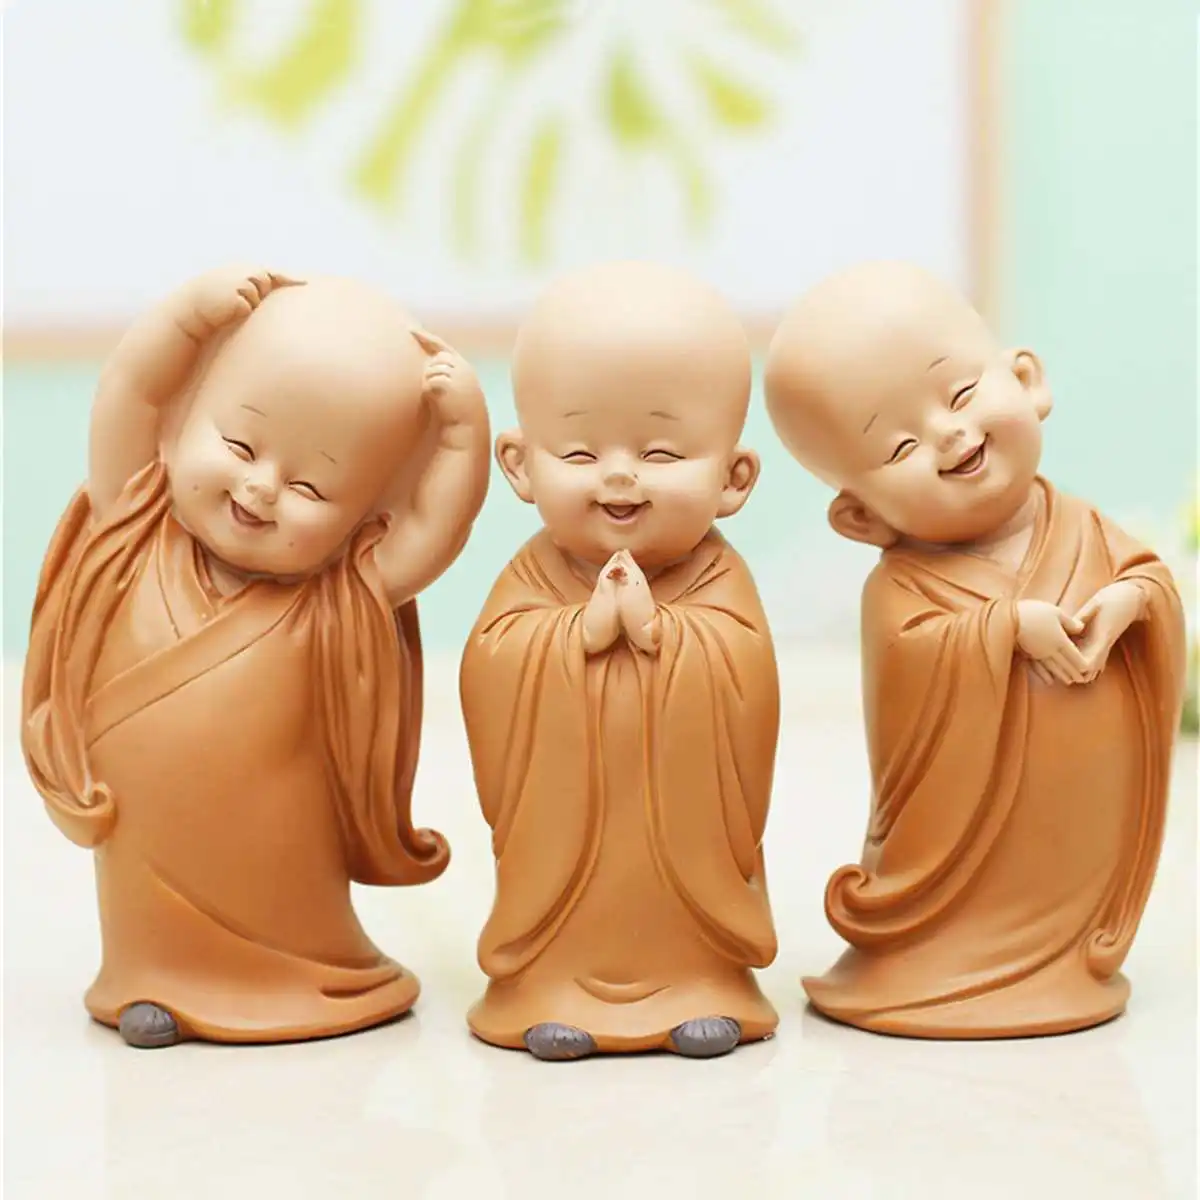 XMAS Gift-Resin Hand-carved Buddha Statue Home Decor Monk Sculpture Toy 